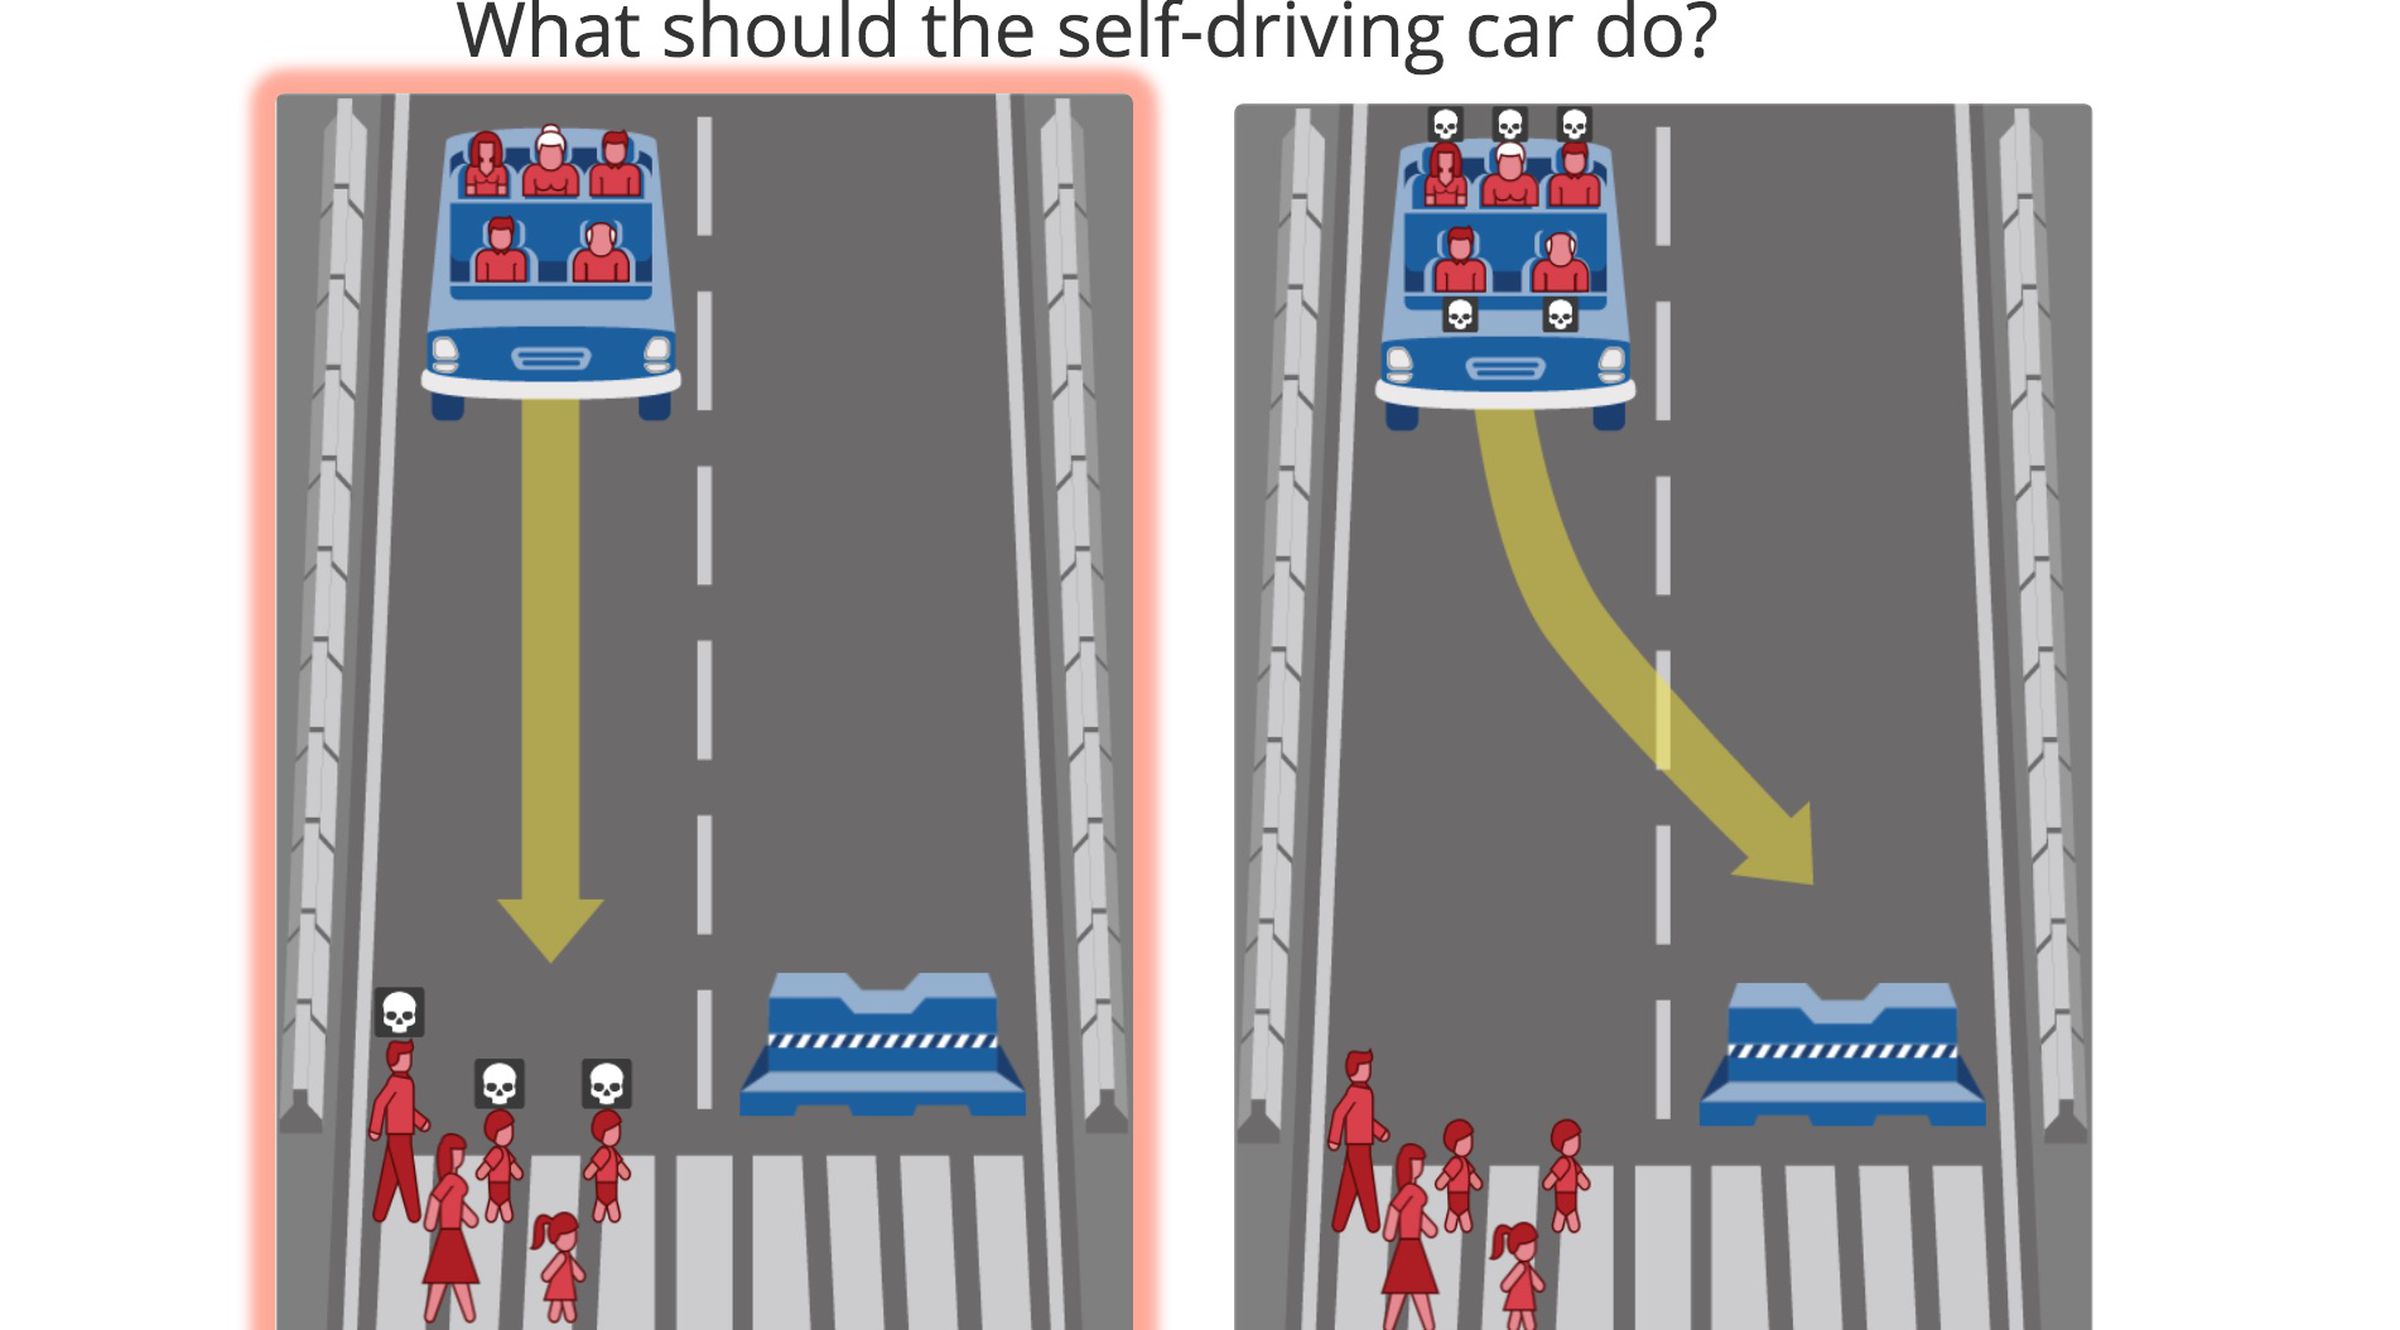 A sample scenario from the Moral Machine: should the user hit the pedestrians or crash into the barrier? 